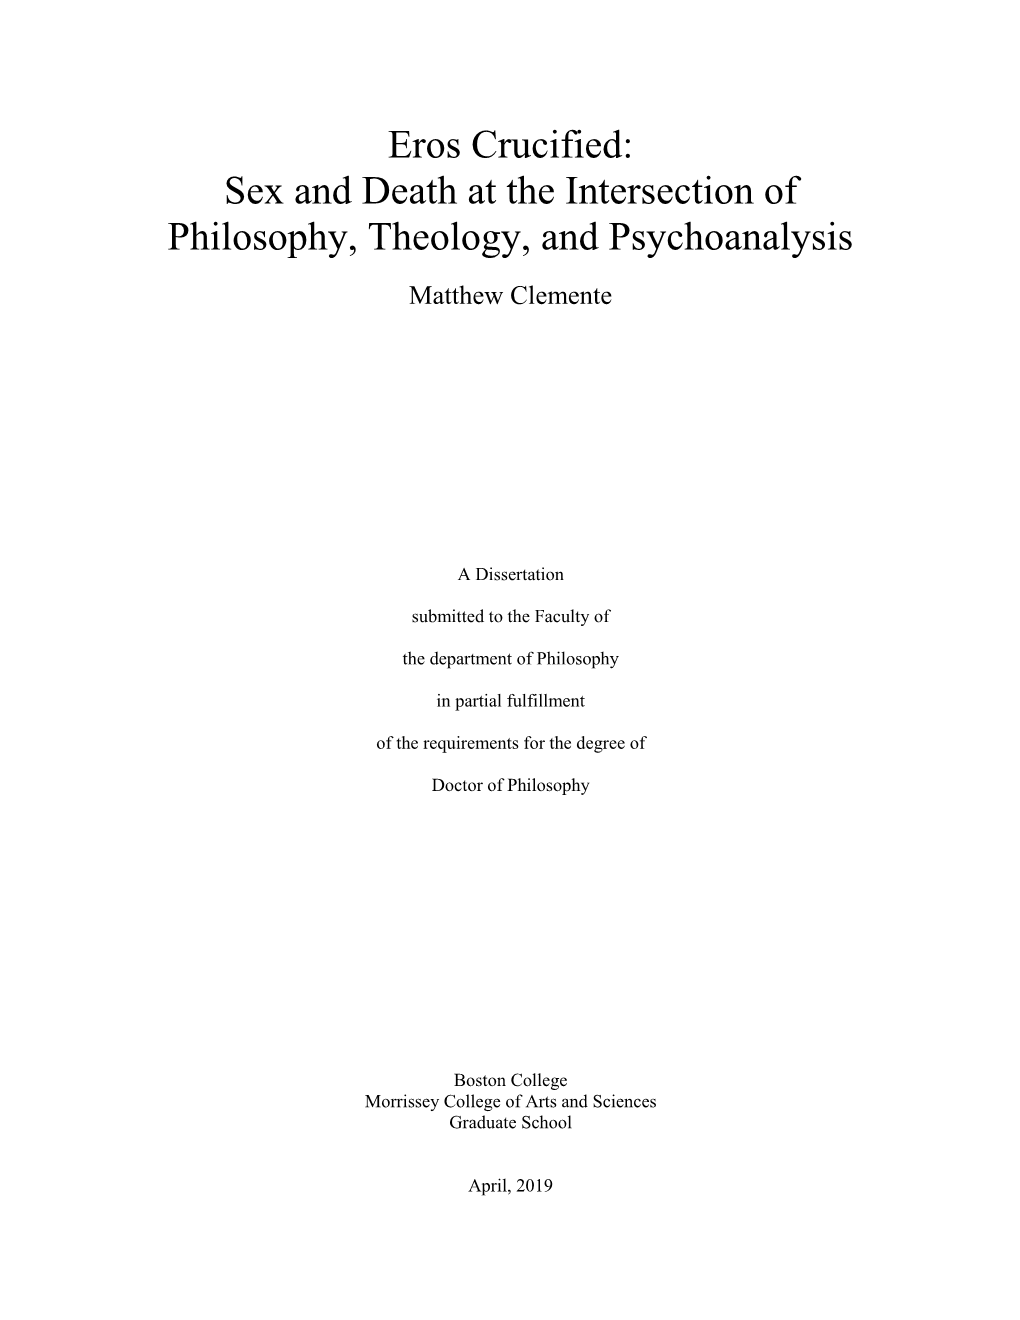 Eros Crucified: Sex and Death at the Intersection of Philosophy, Theology, and Psychoanalysis